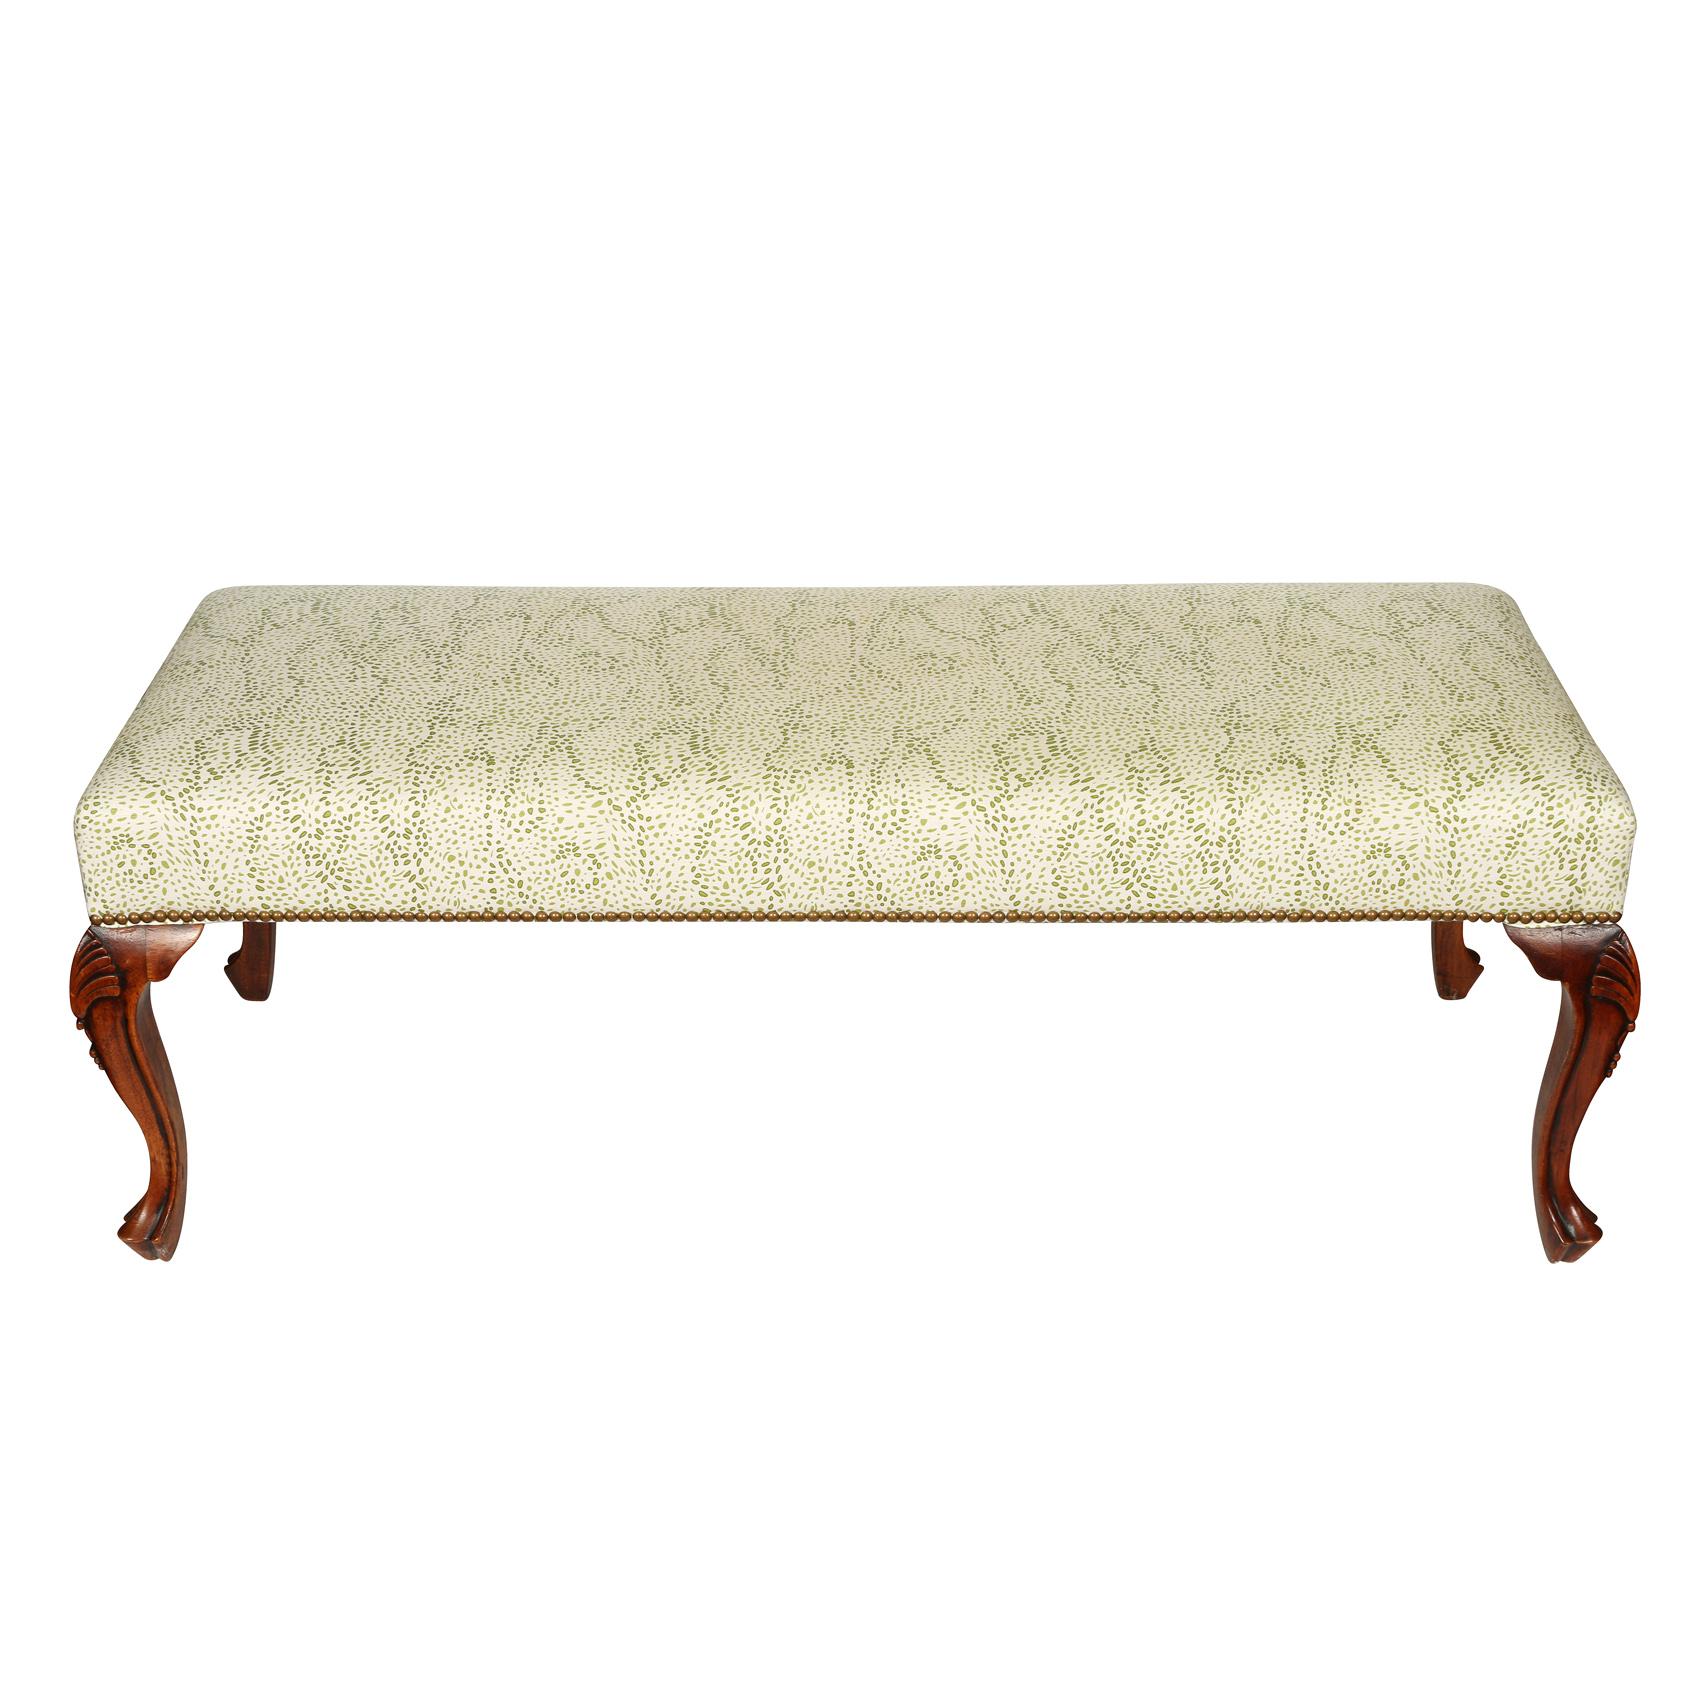 French Upholstered Bench with Cabriole Legs in Meg Braff Designs Menton Fabric In Excellent Condition For Sale In Locust Valley, NY